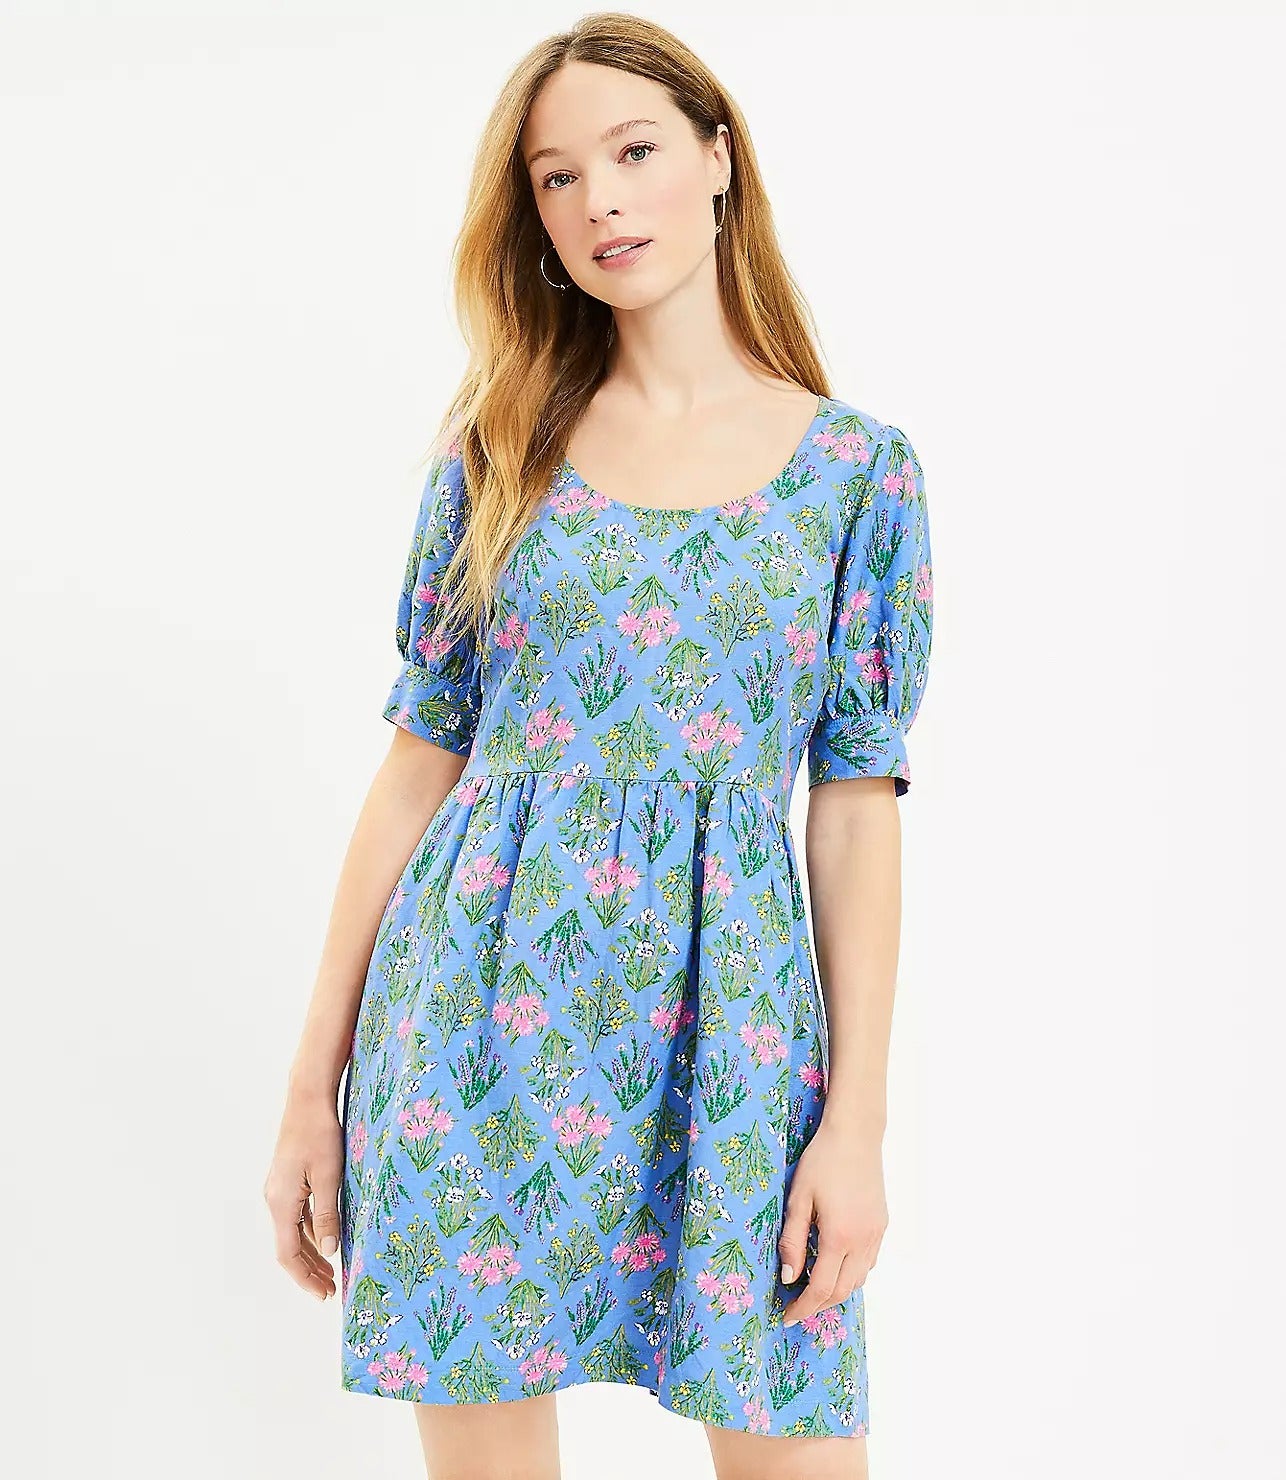 model in blue short sleeve dress with pink green yellow and white floral print